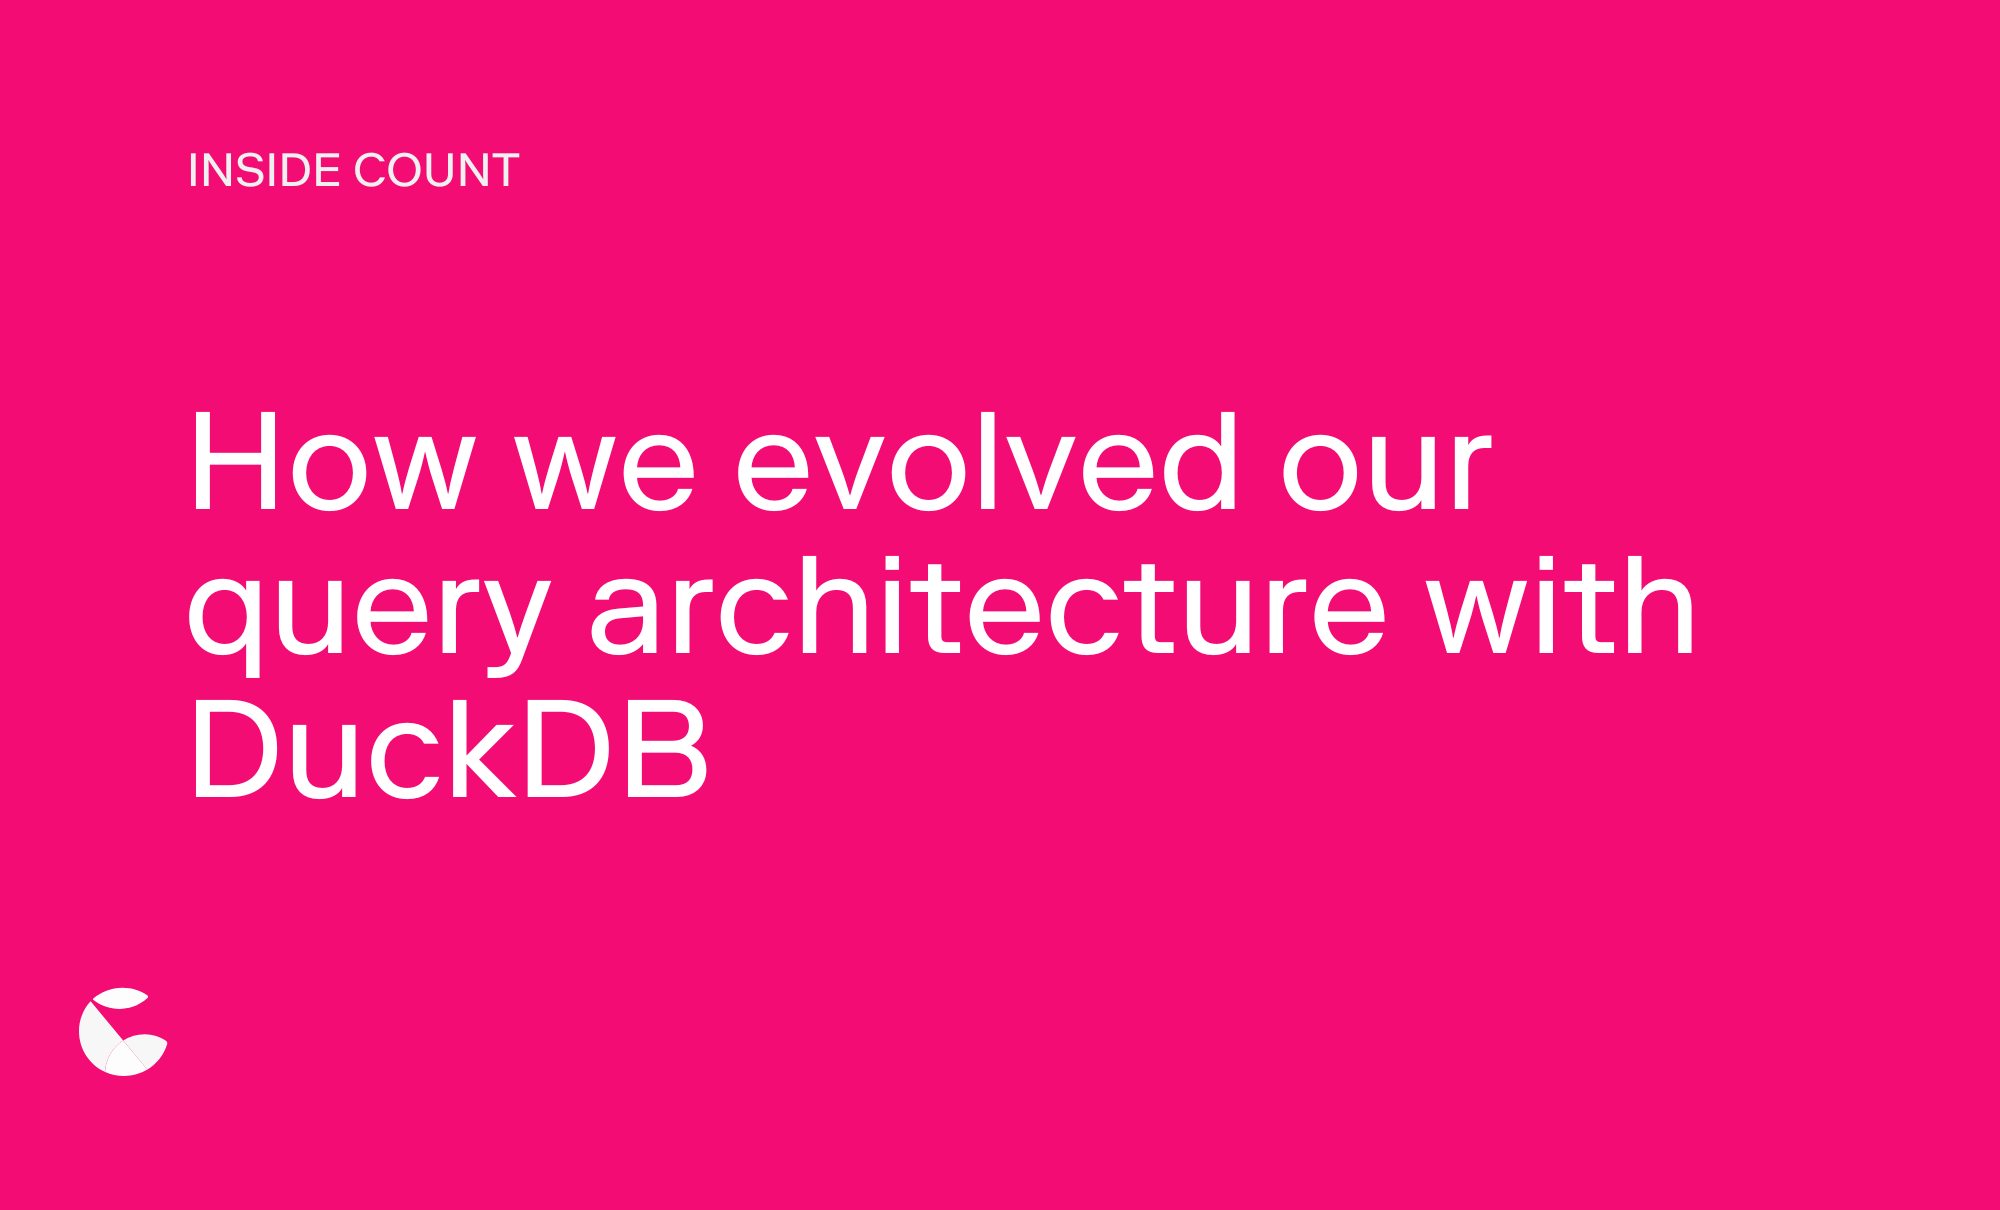 How we evolved our query architecture with DuckDB